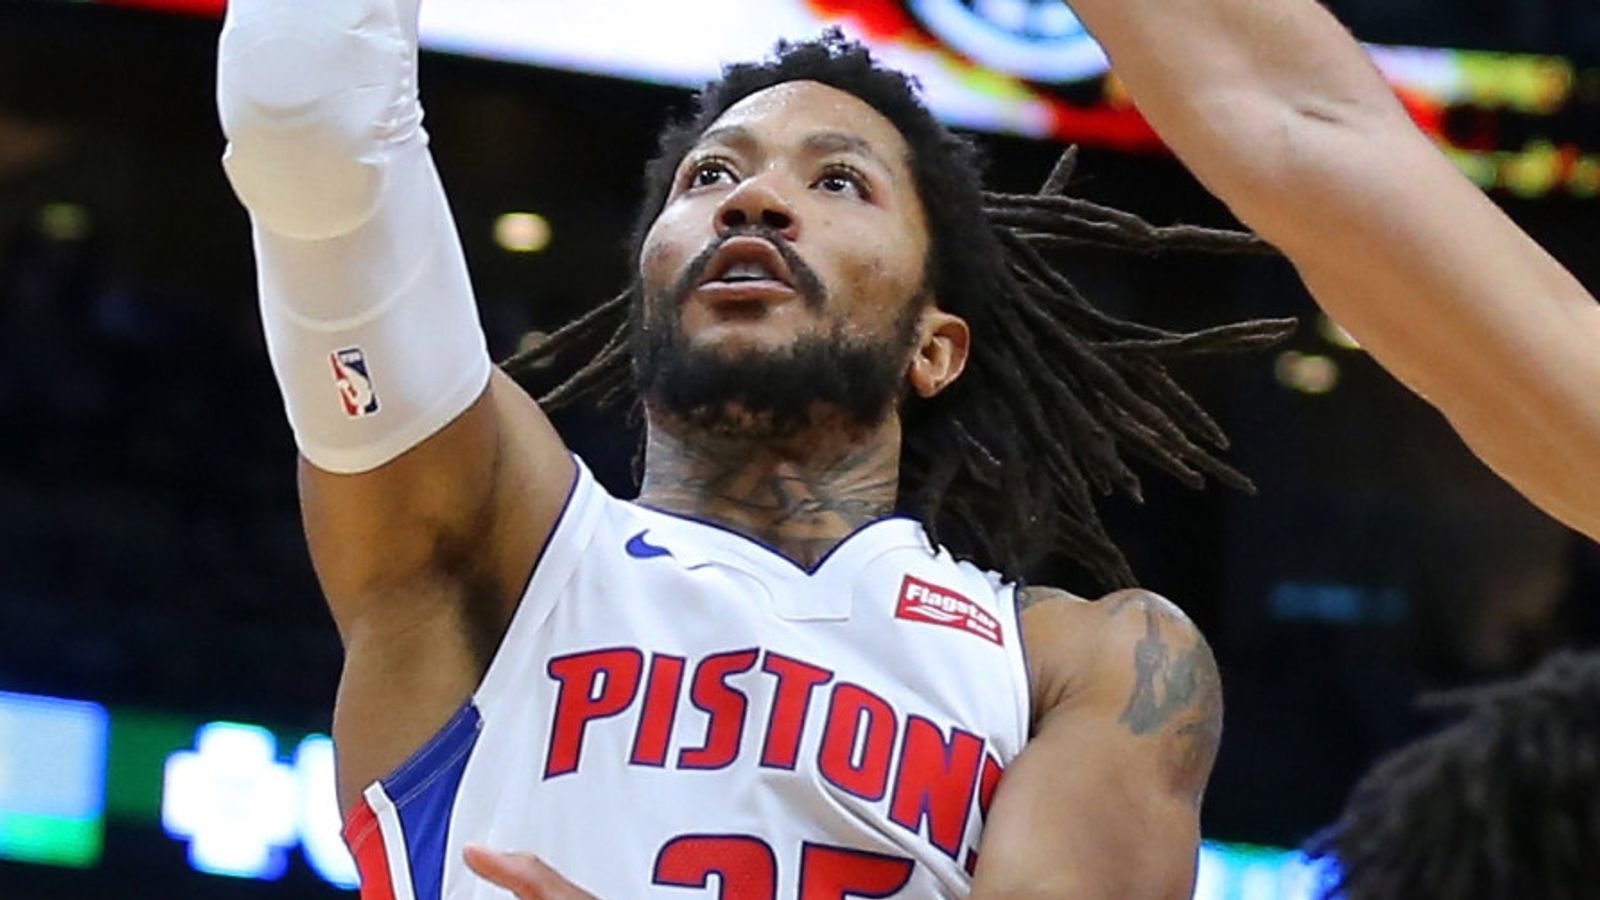 NBA on ESPN - Derrick Rose in these Detroit Pistons throwback threads is 🔥